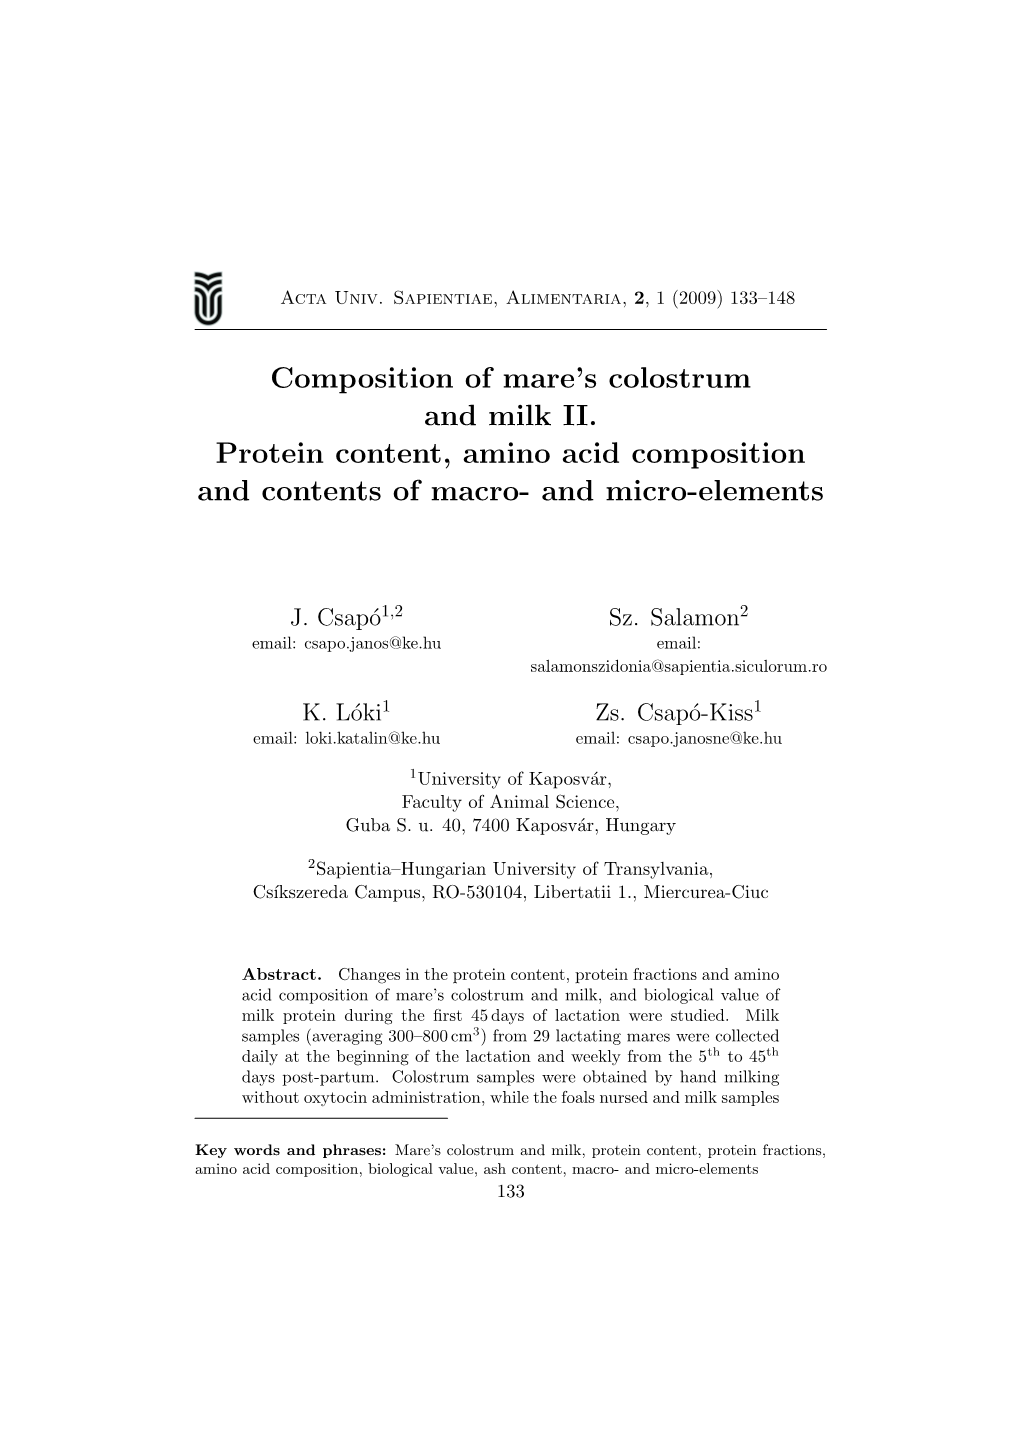 Composition of Mare's Colostrum and Milk II. Protein Content, Amino Acid